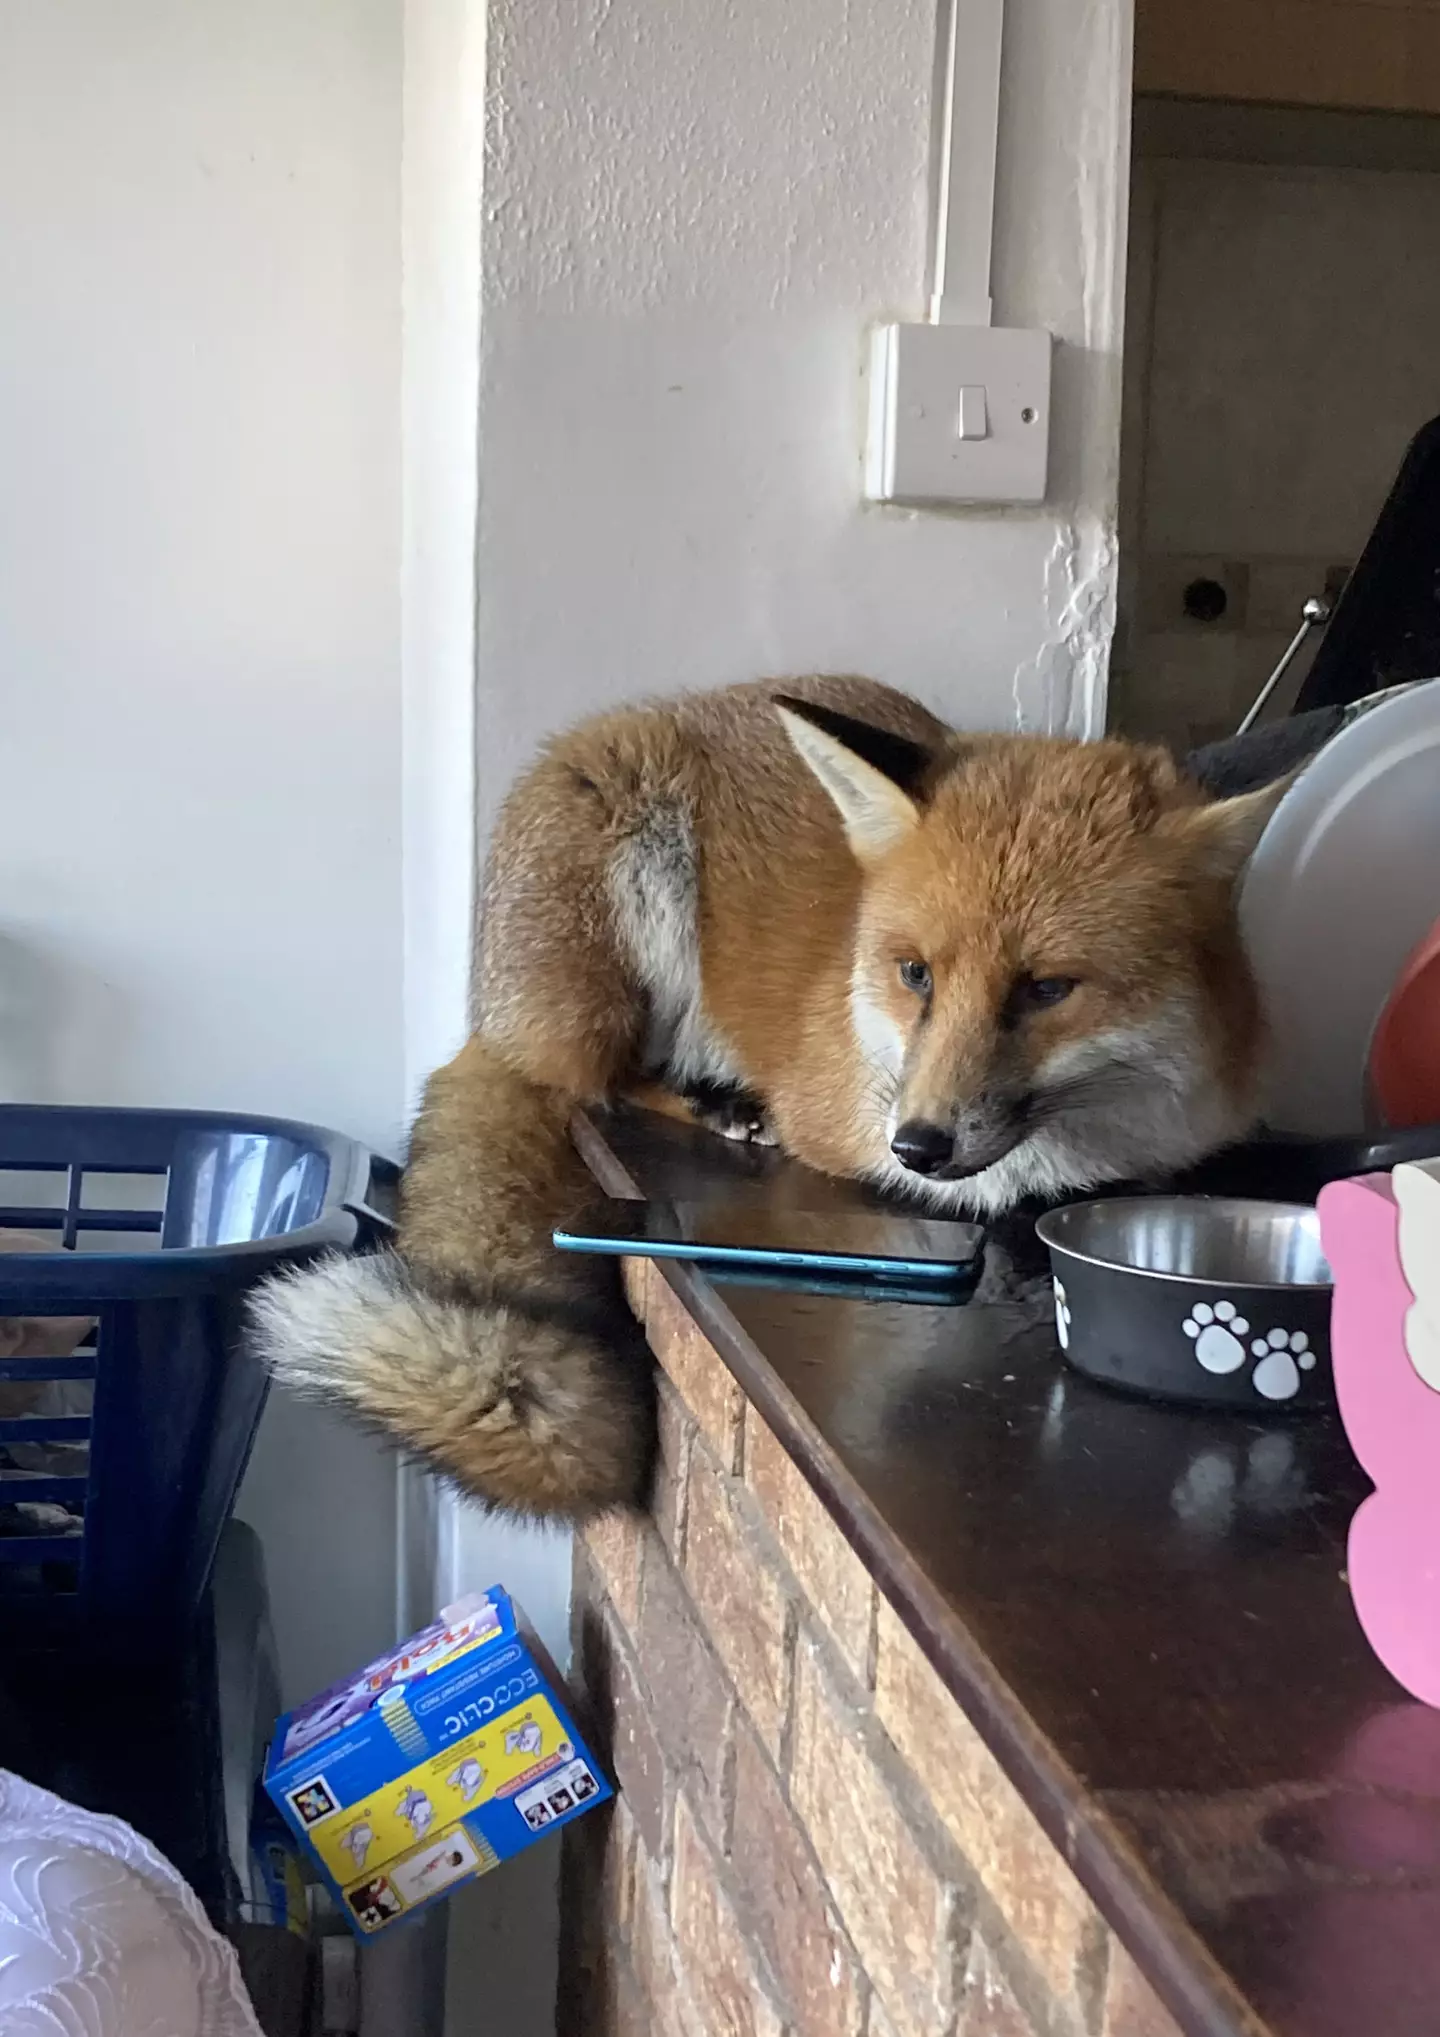 This fox made himself right at home.